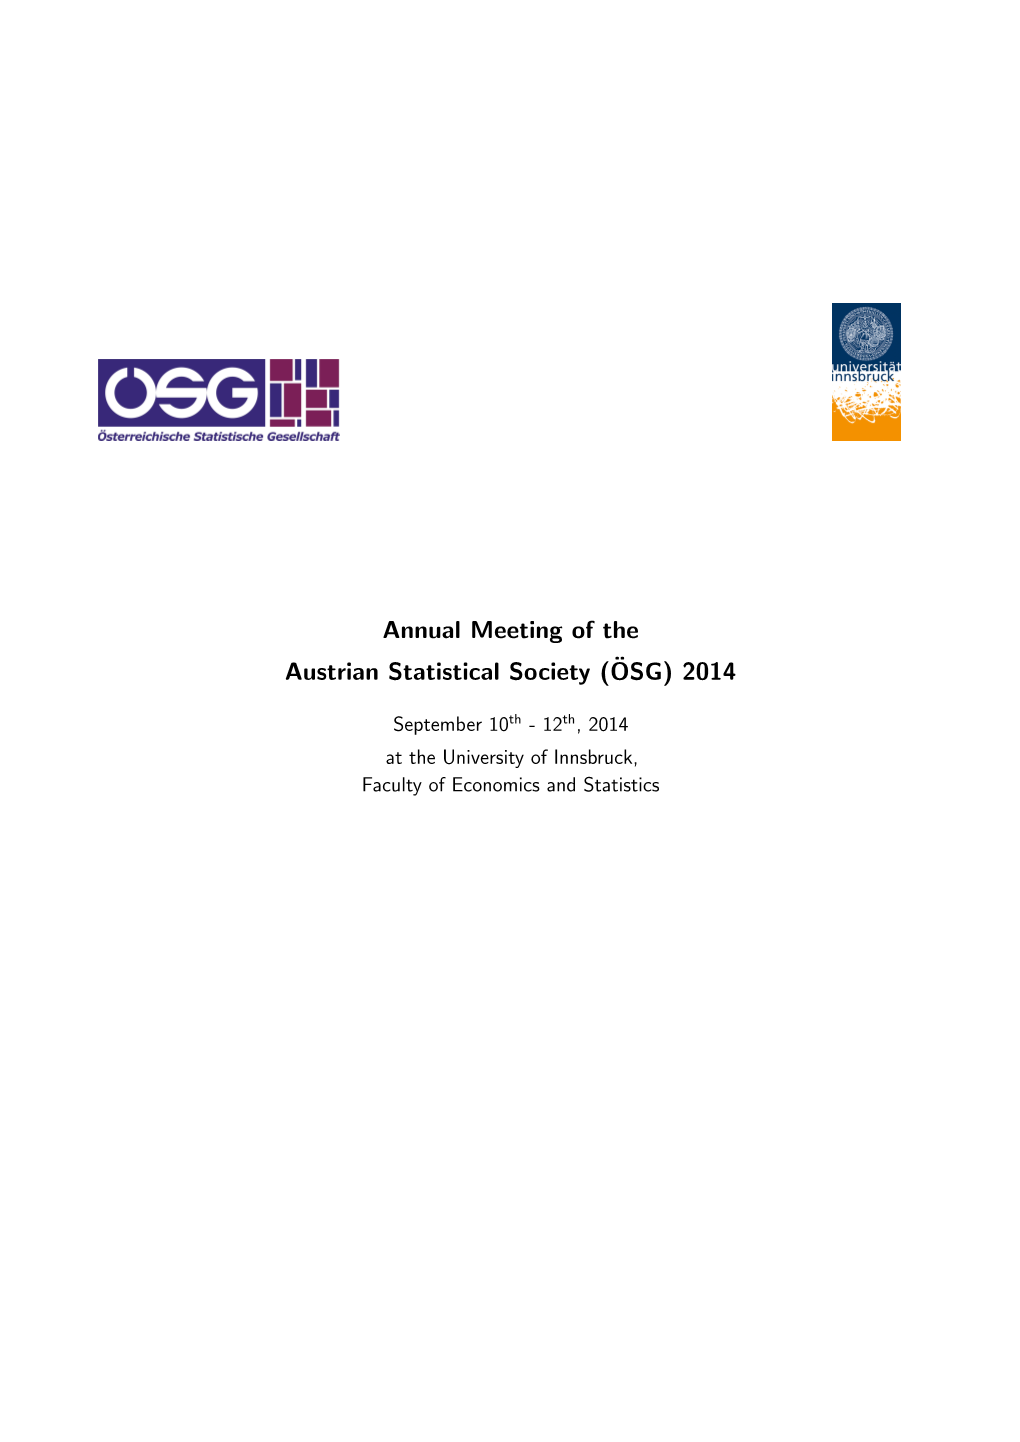 Annual Meeting of the Austrian Statistical Society (¨OSG) 2014